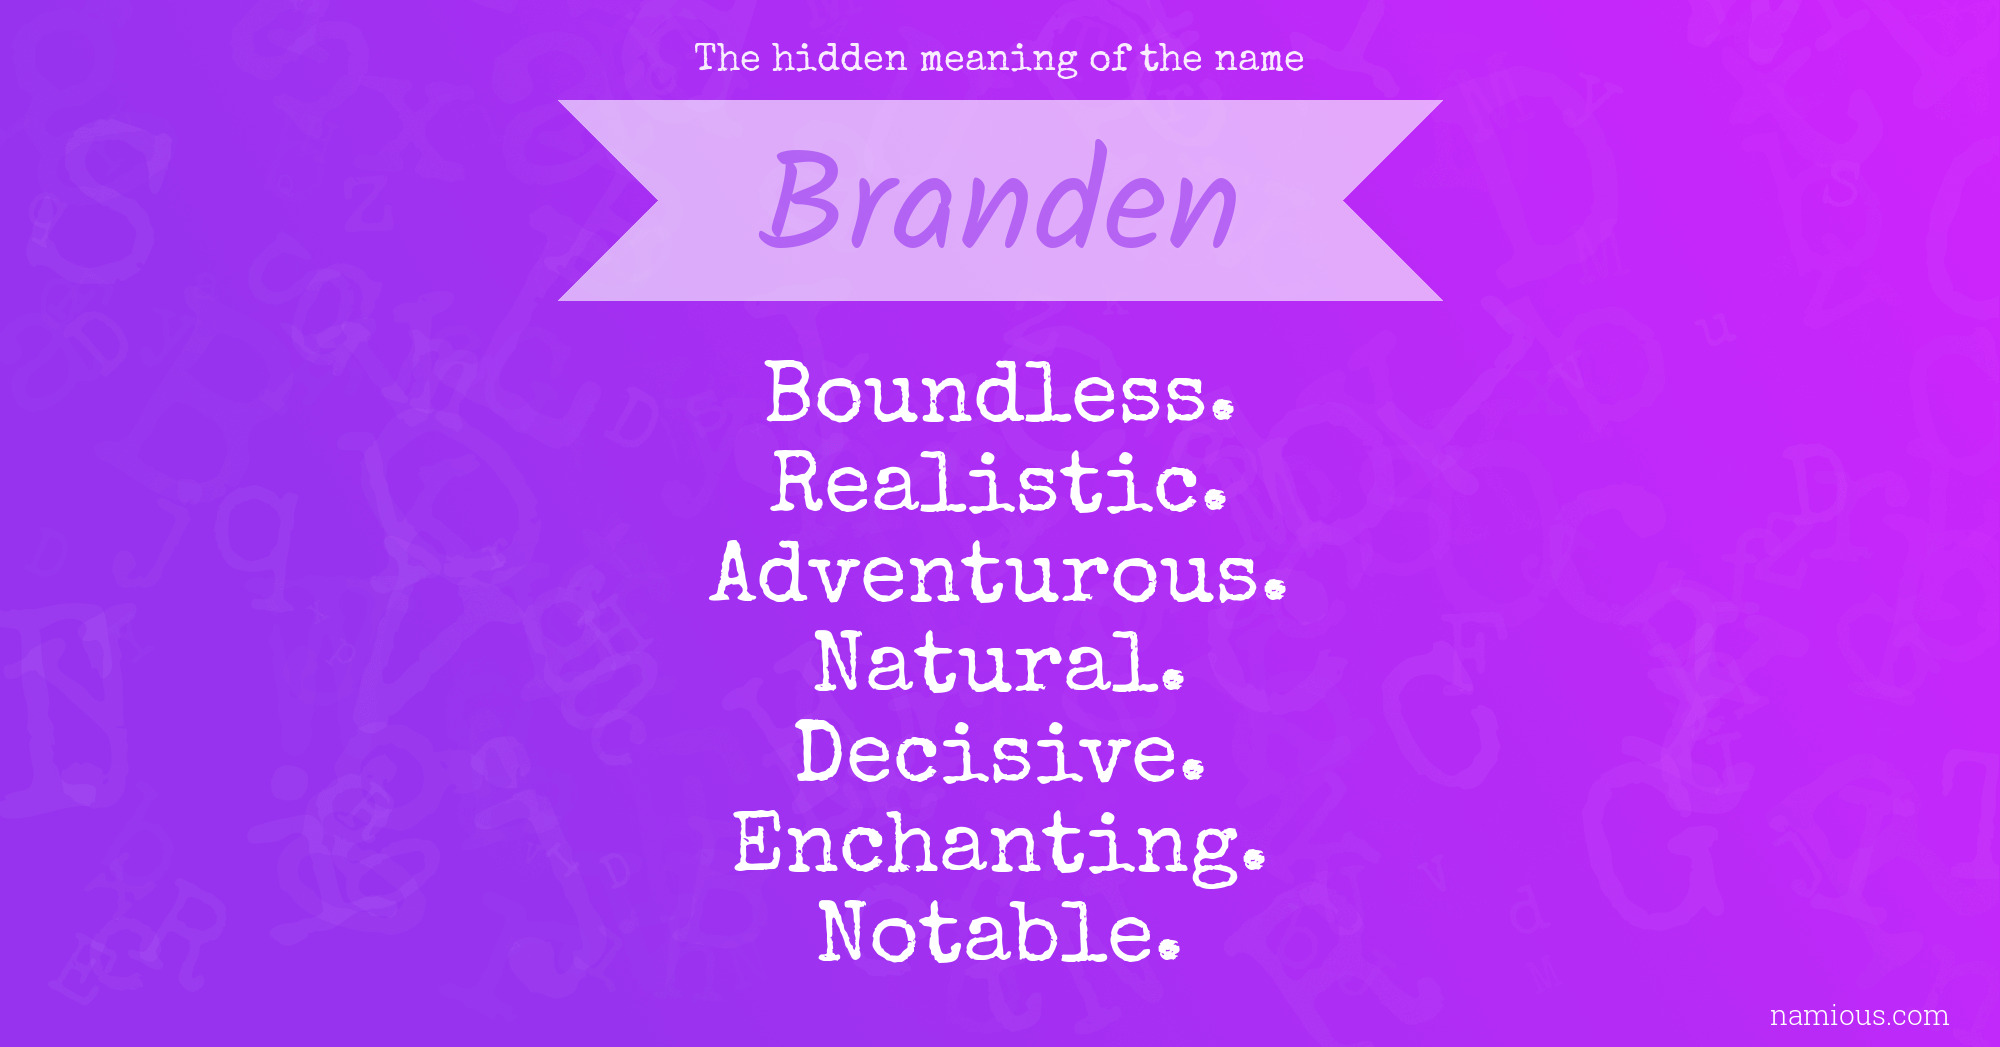 The hidden meaning of the name Branden